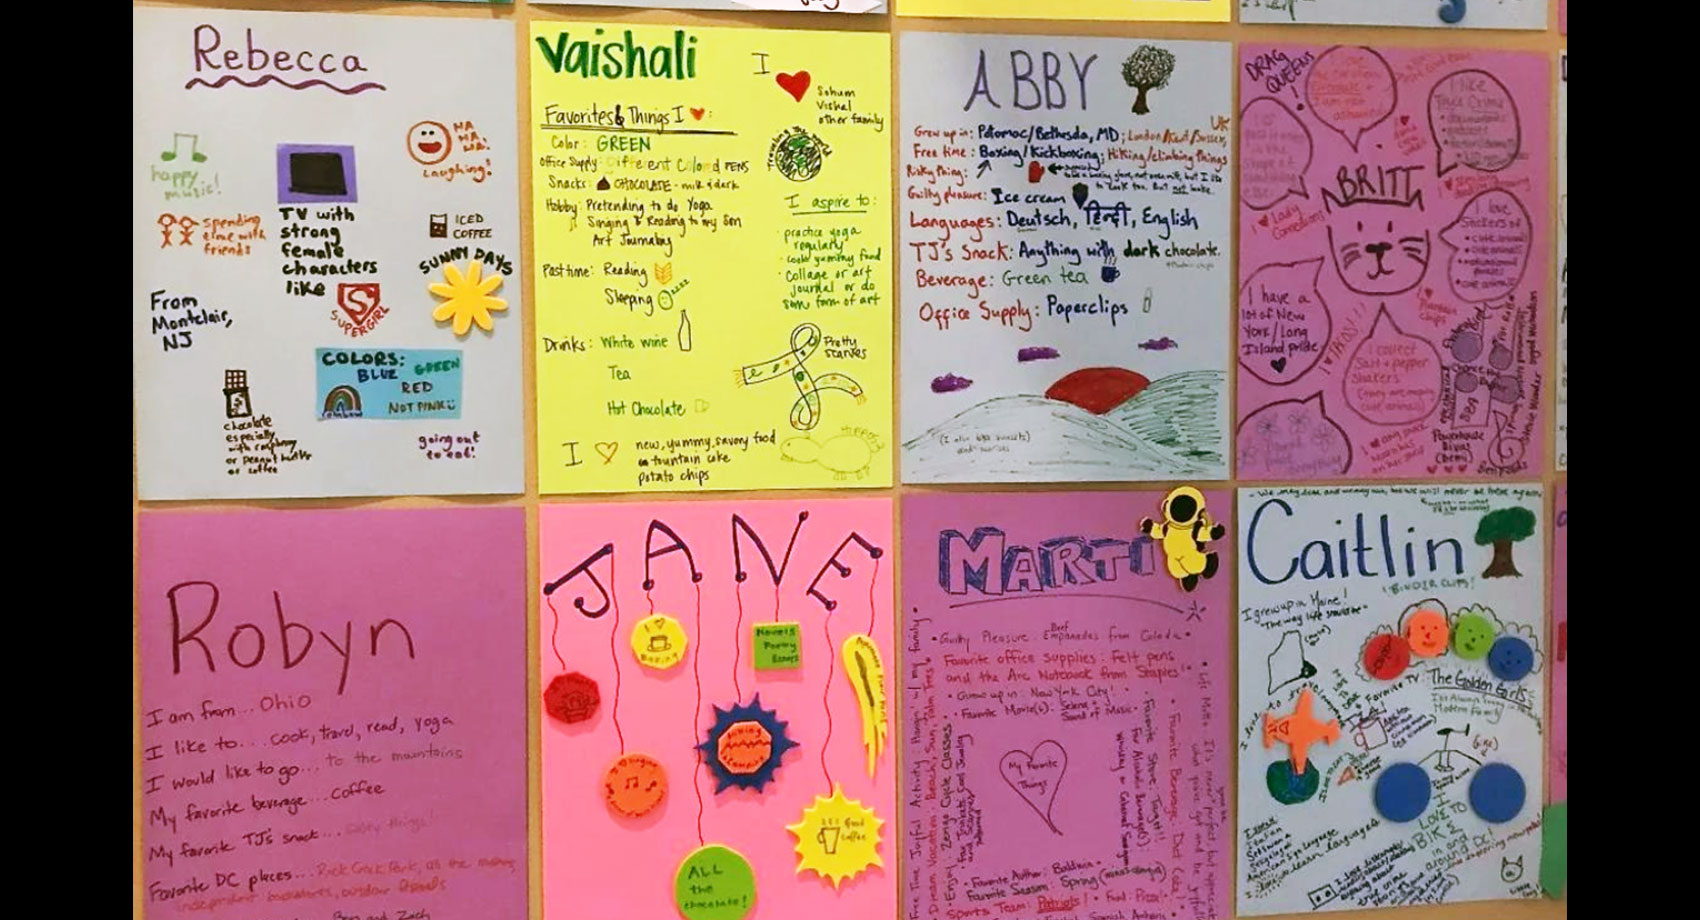 A photo of pieces of paper on a classroom wall, each with a student's name and information about them, created by the student